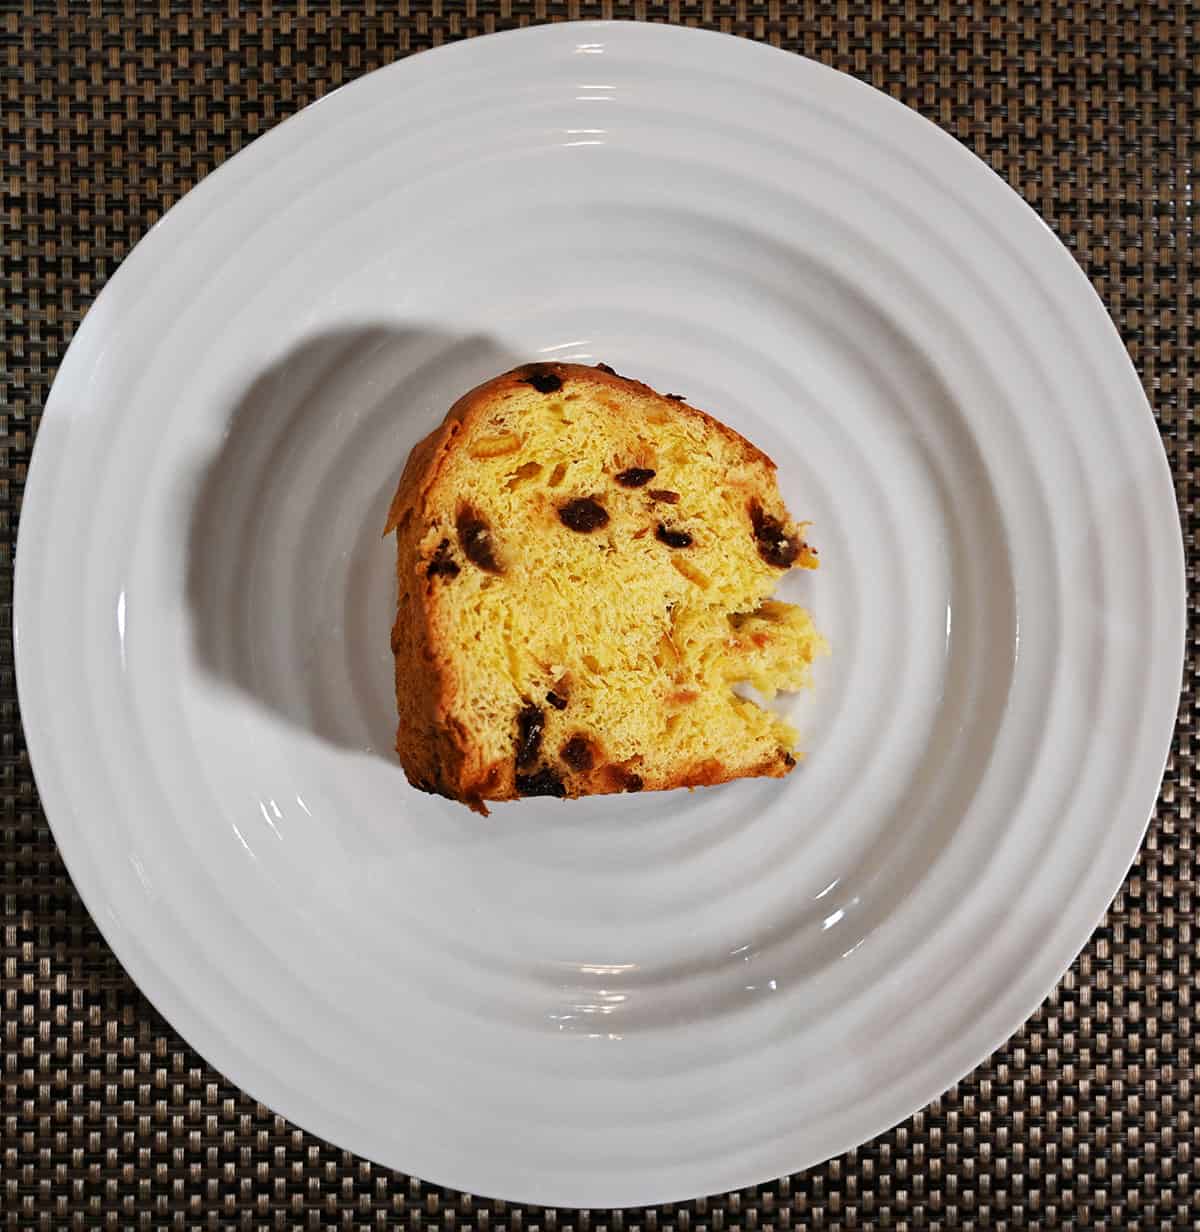 Top down image of one slice of panettone served on a white plate.